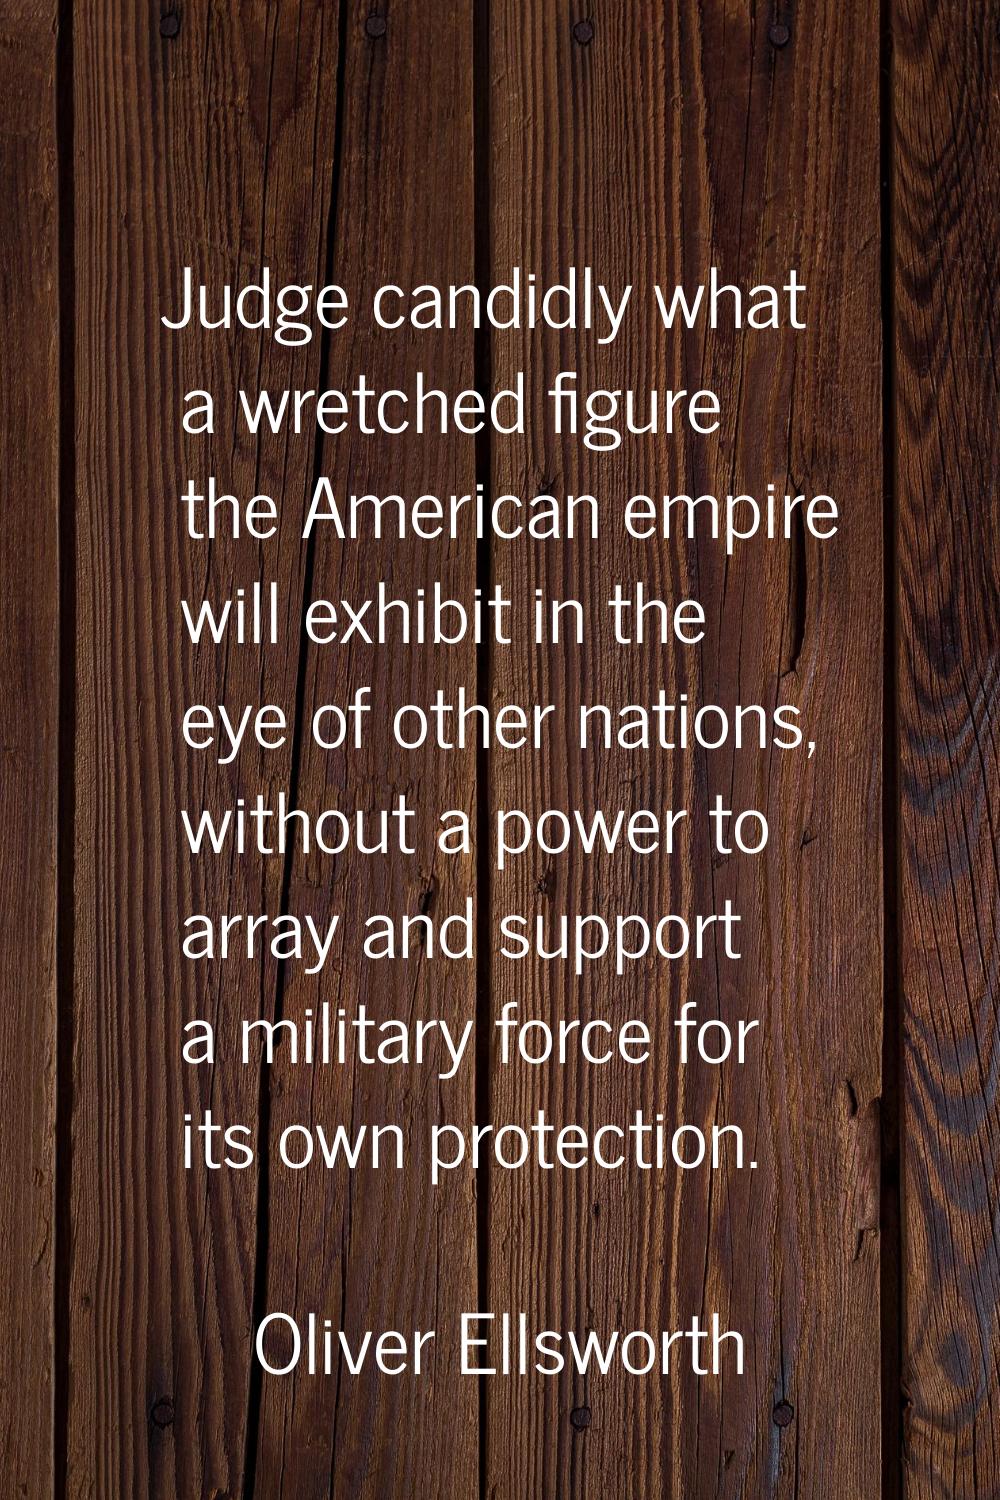 Judge candidly what a wretched figure the American empire will exhibit in the eye of other nations,